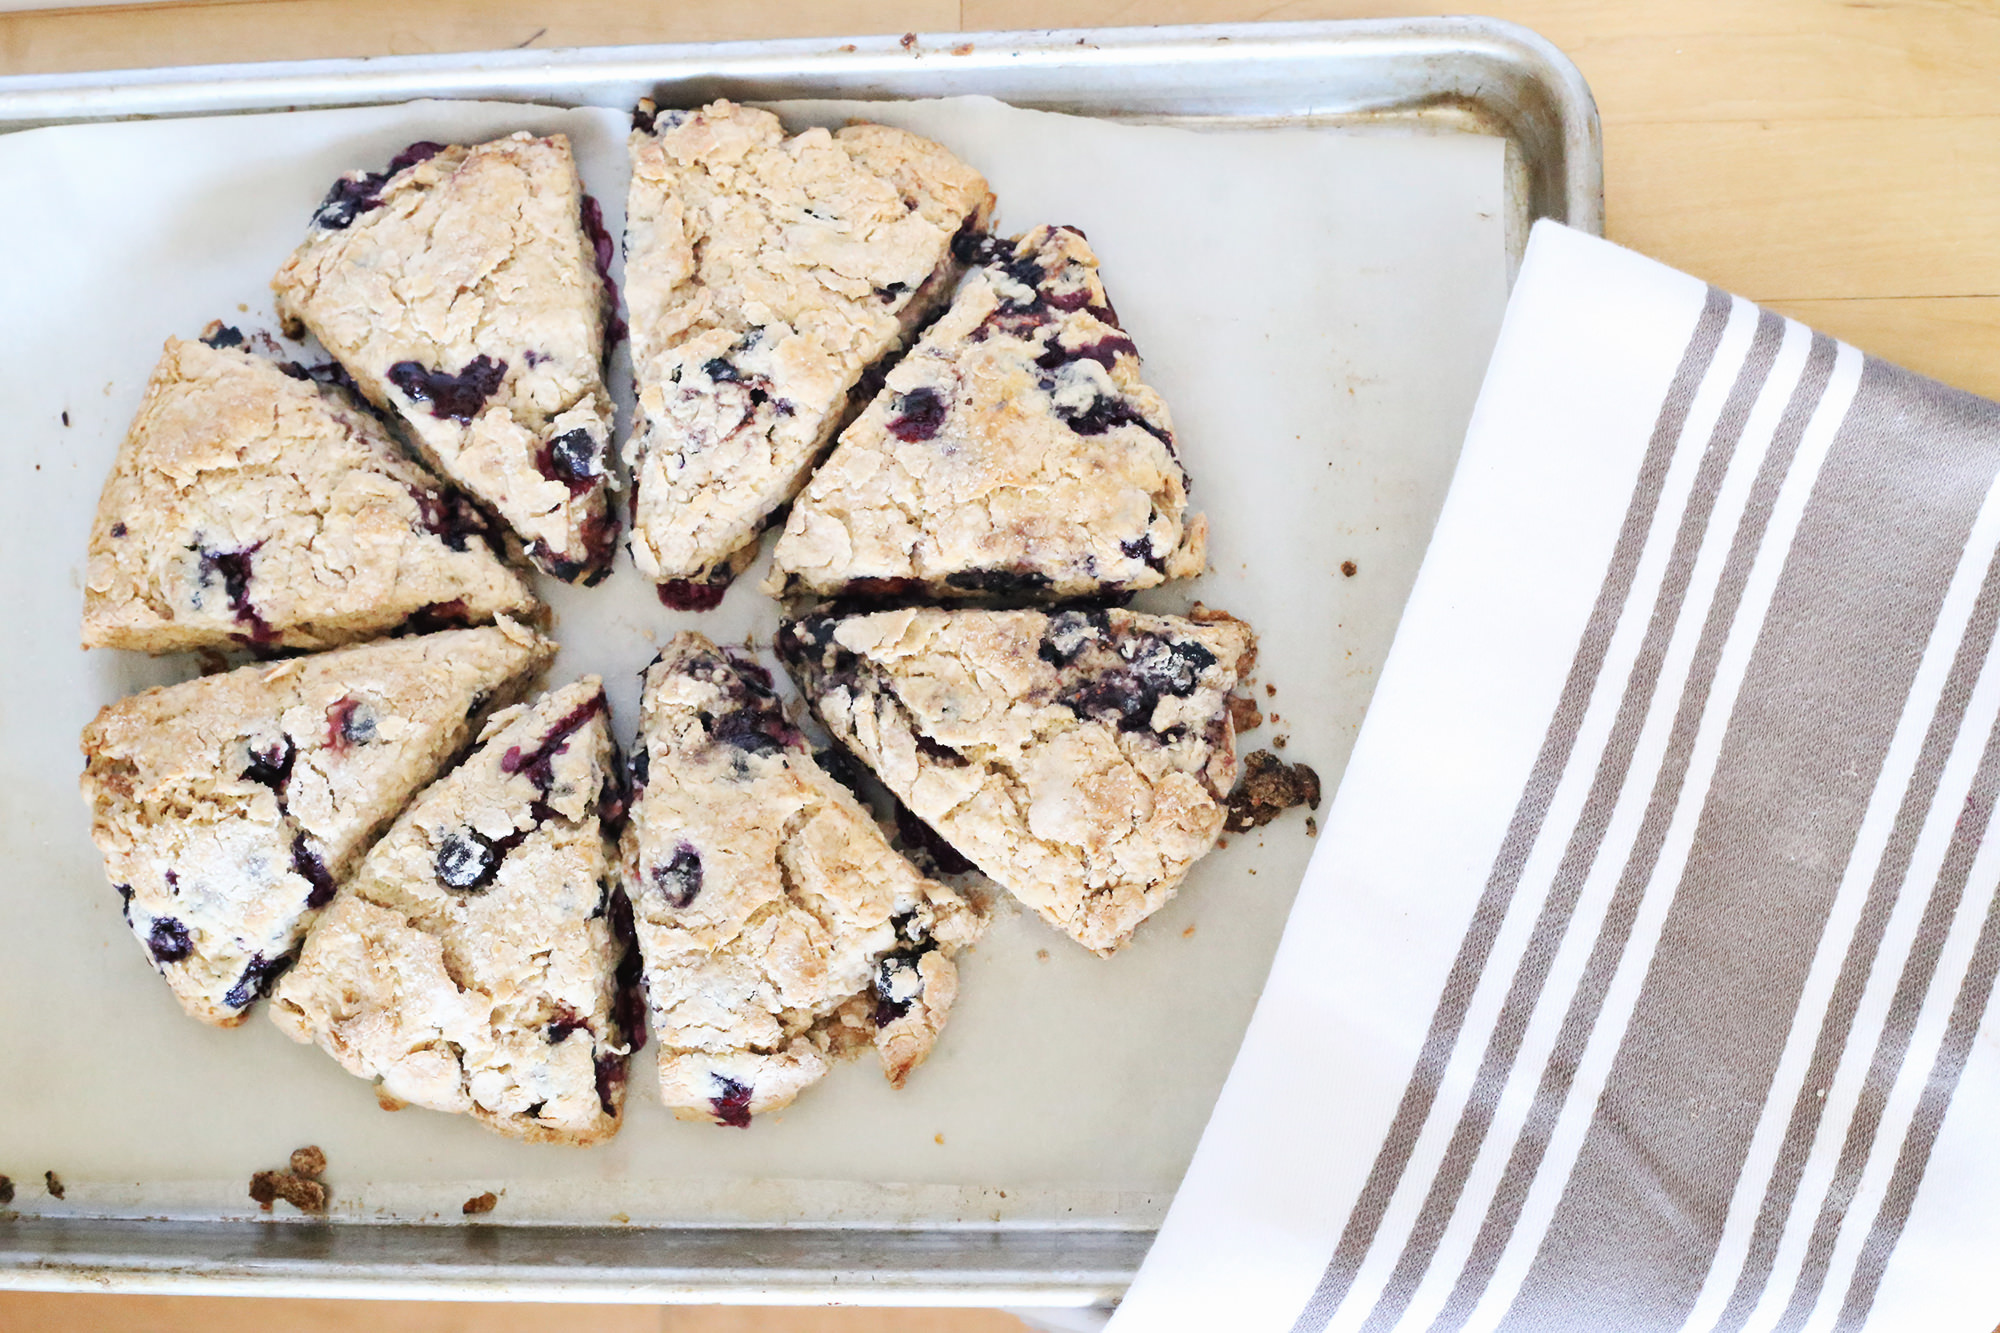 Make tea time extra special by mixing up a batch of these blueberry scones!